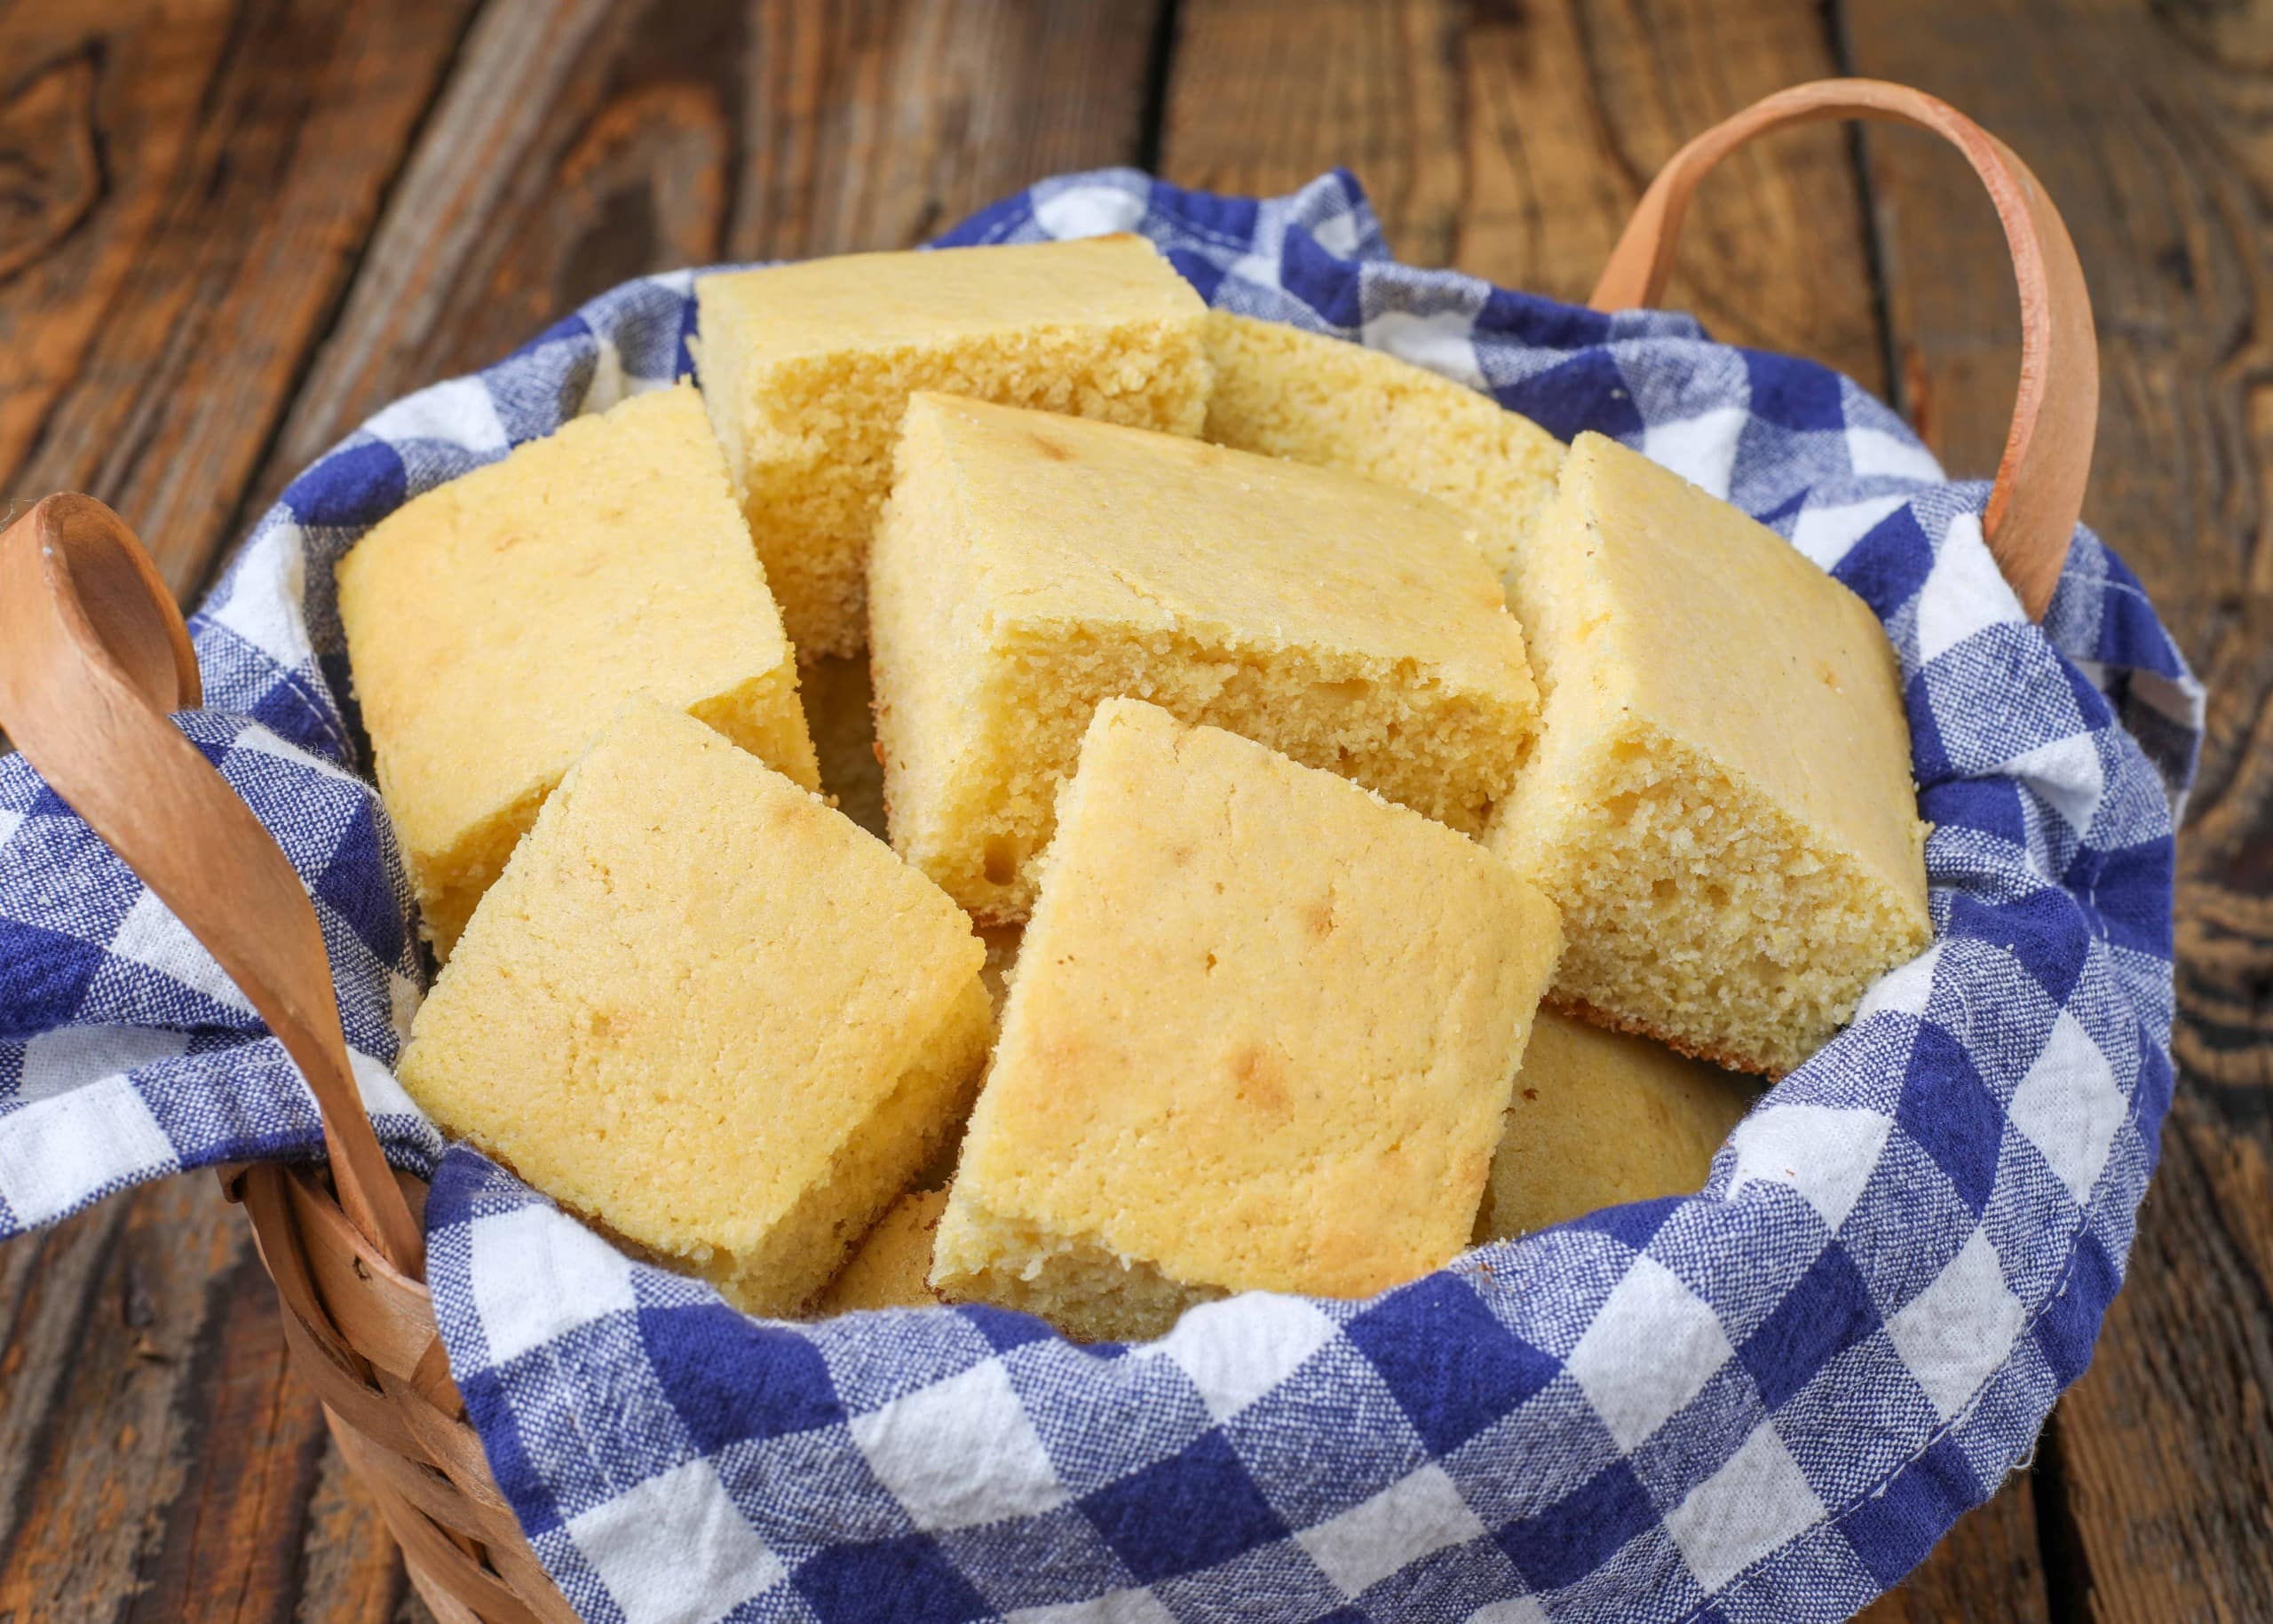 https://chocolatewithgrace.com/wp-content/uploads/2022/07/Cornbread-CWG-3-1-of-1-scaled.jpg